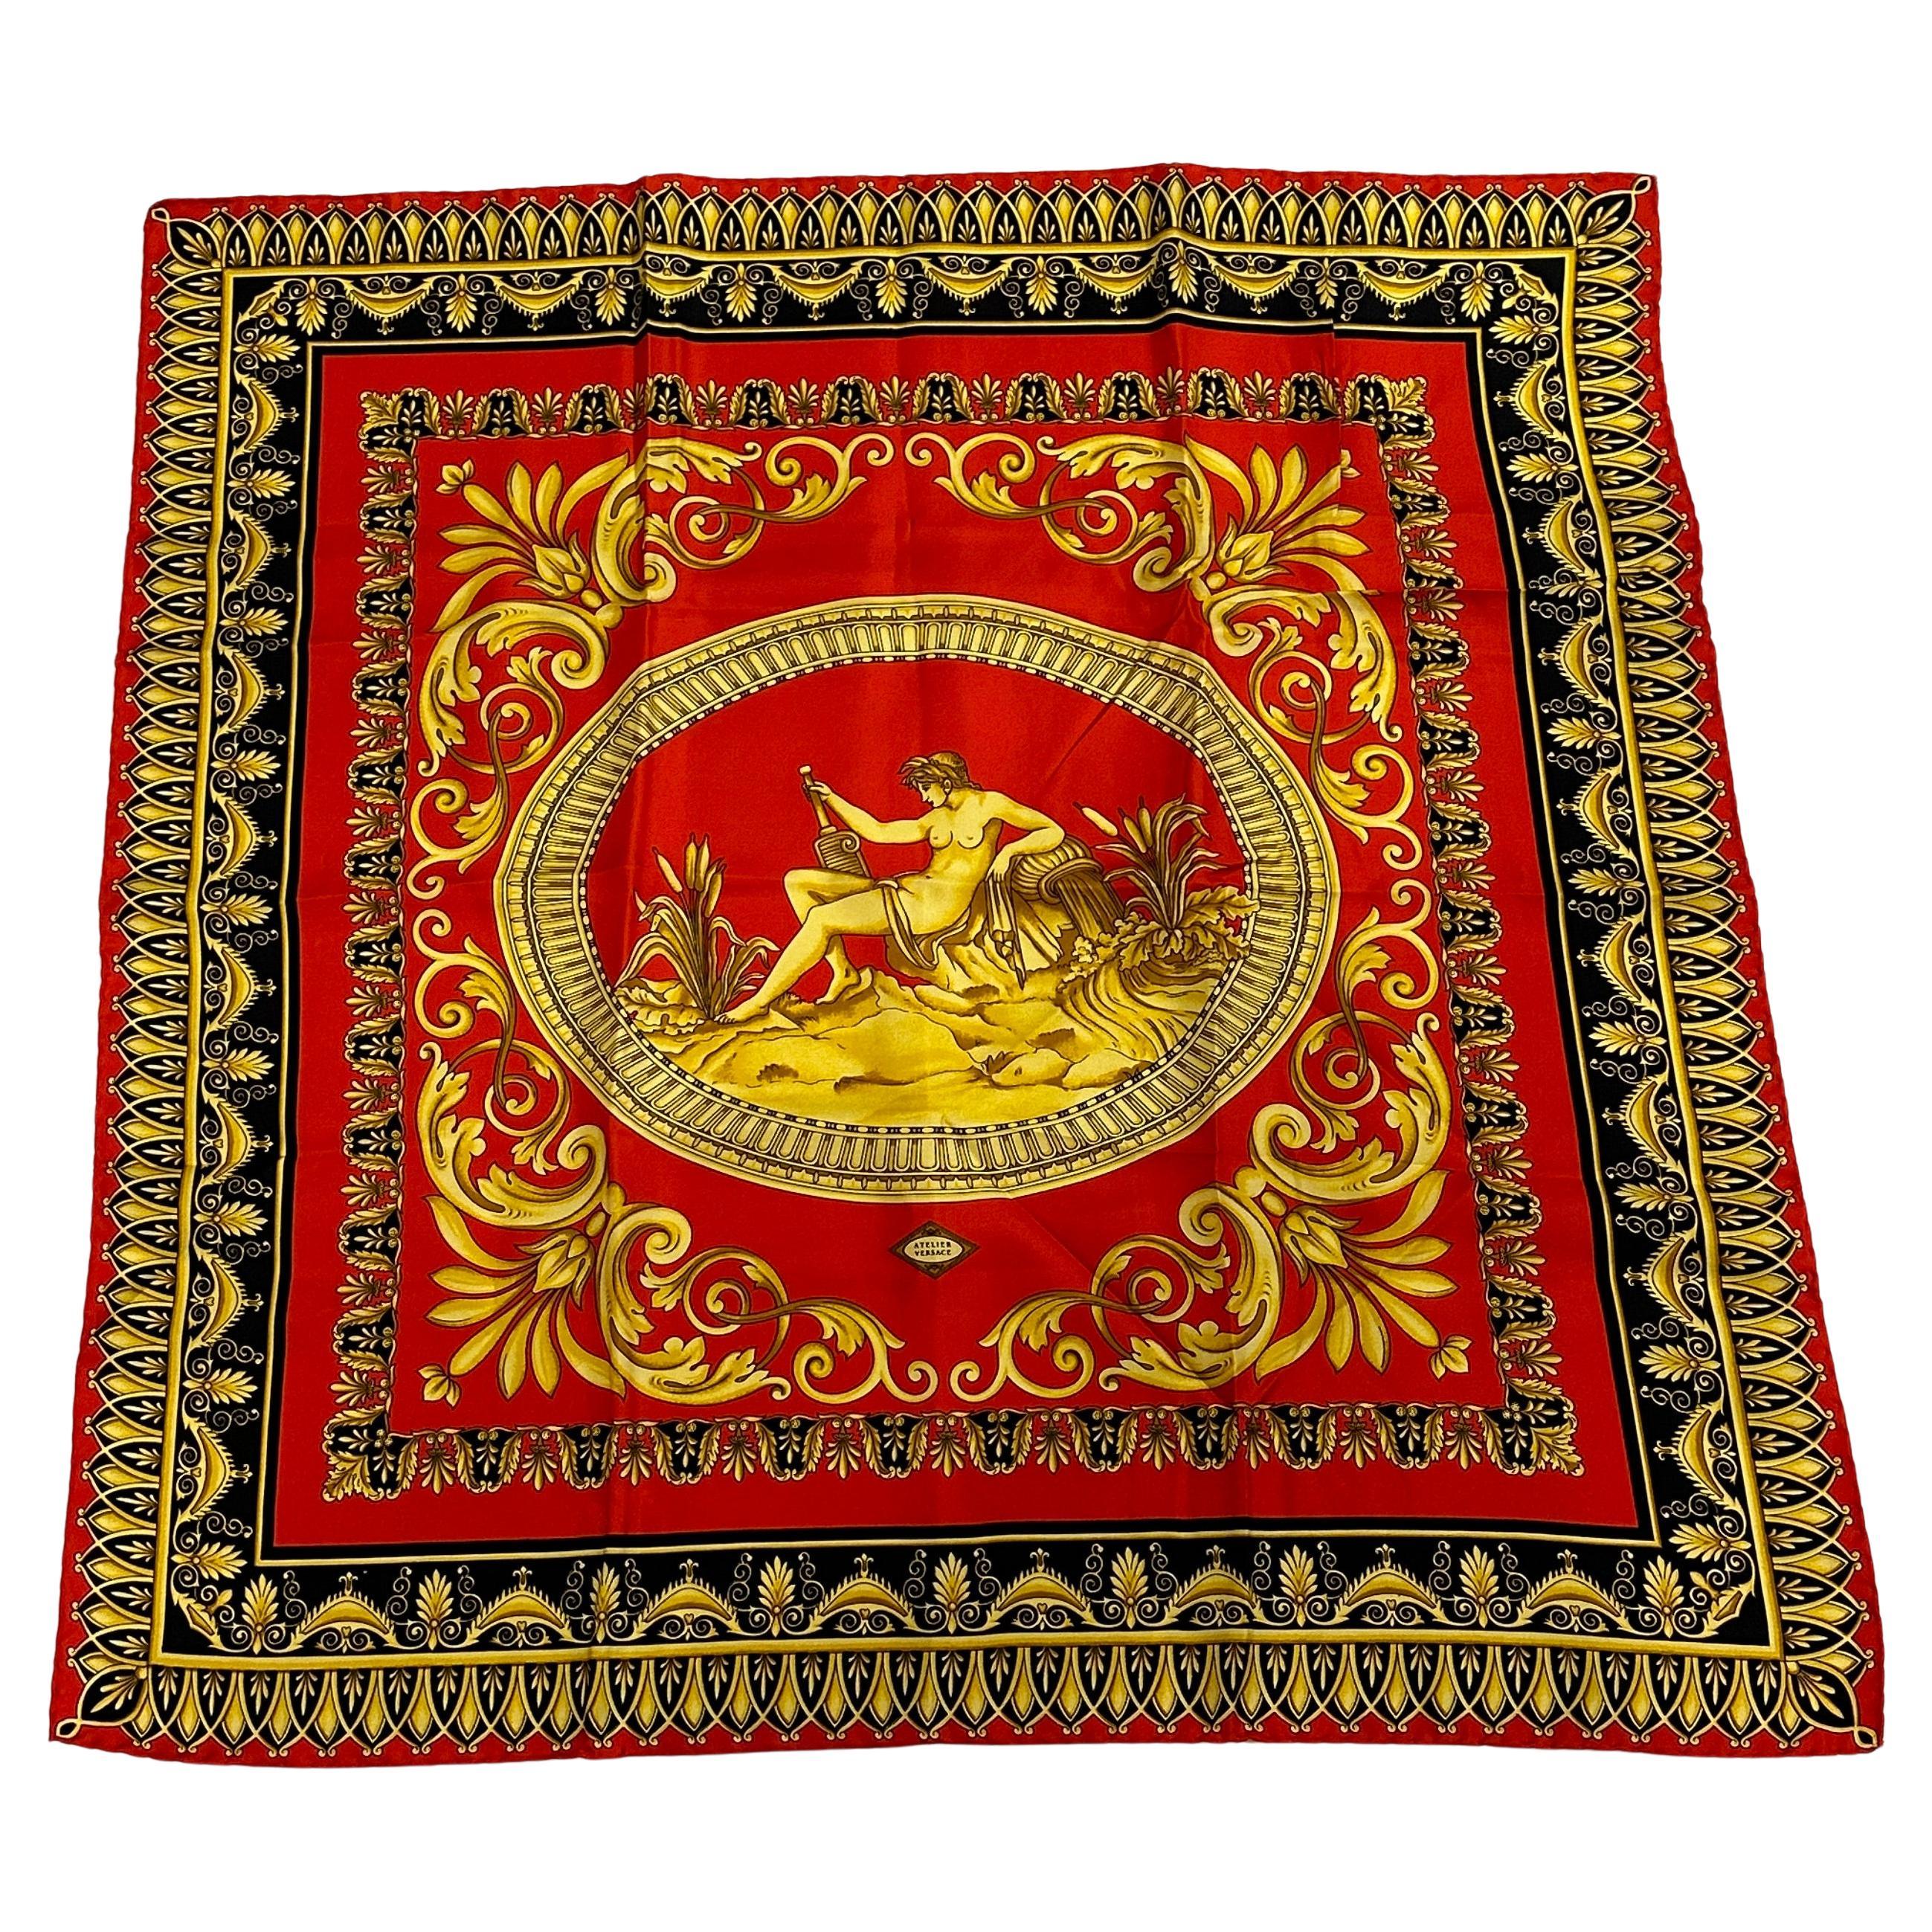 Gianni Versace Bold "House Of Versace" Silk Jacquard Scarf For Sale